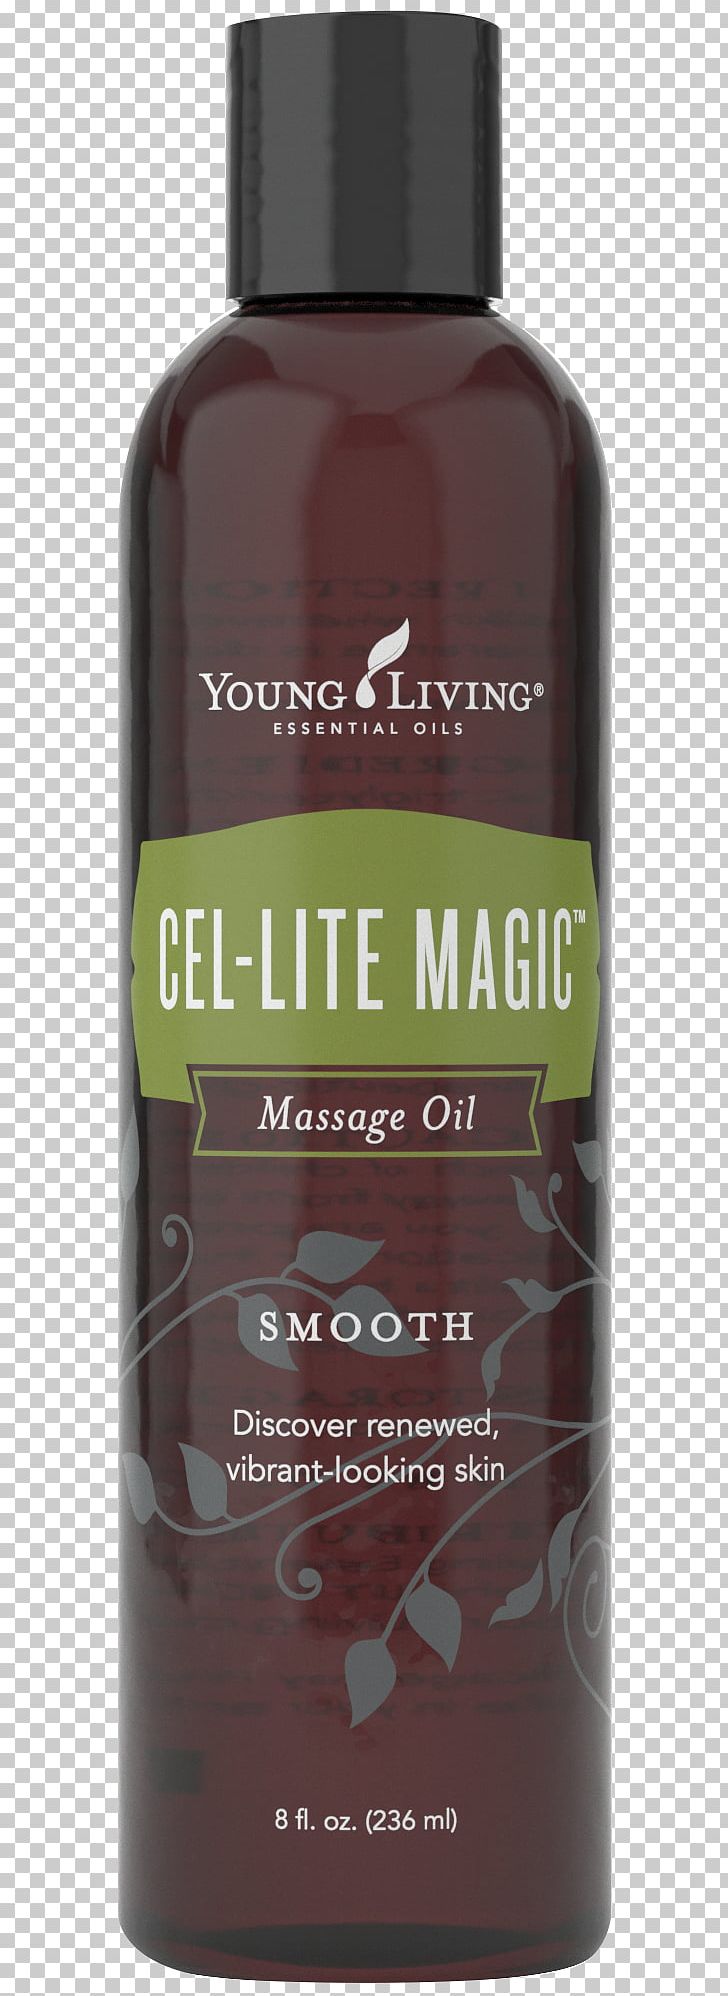 Cel-Lite Magic Massage Oil 8 OZ Bottle By Young Living Essential V-6 Enhanced Vegetable Oil Complex 8 Oz (236 Ml) By Young Living Essential Oil PNG, Clipart, Beautym, Essential Oil, Hair Care, Health, Lavender Free PNG Download